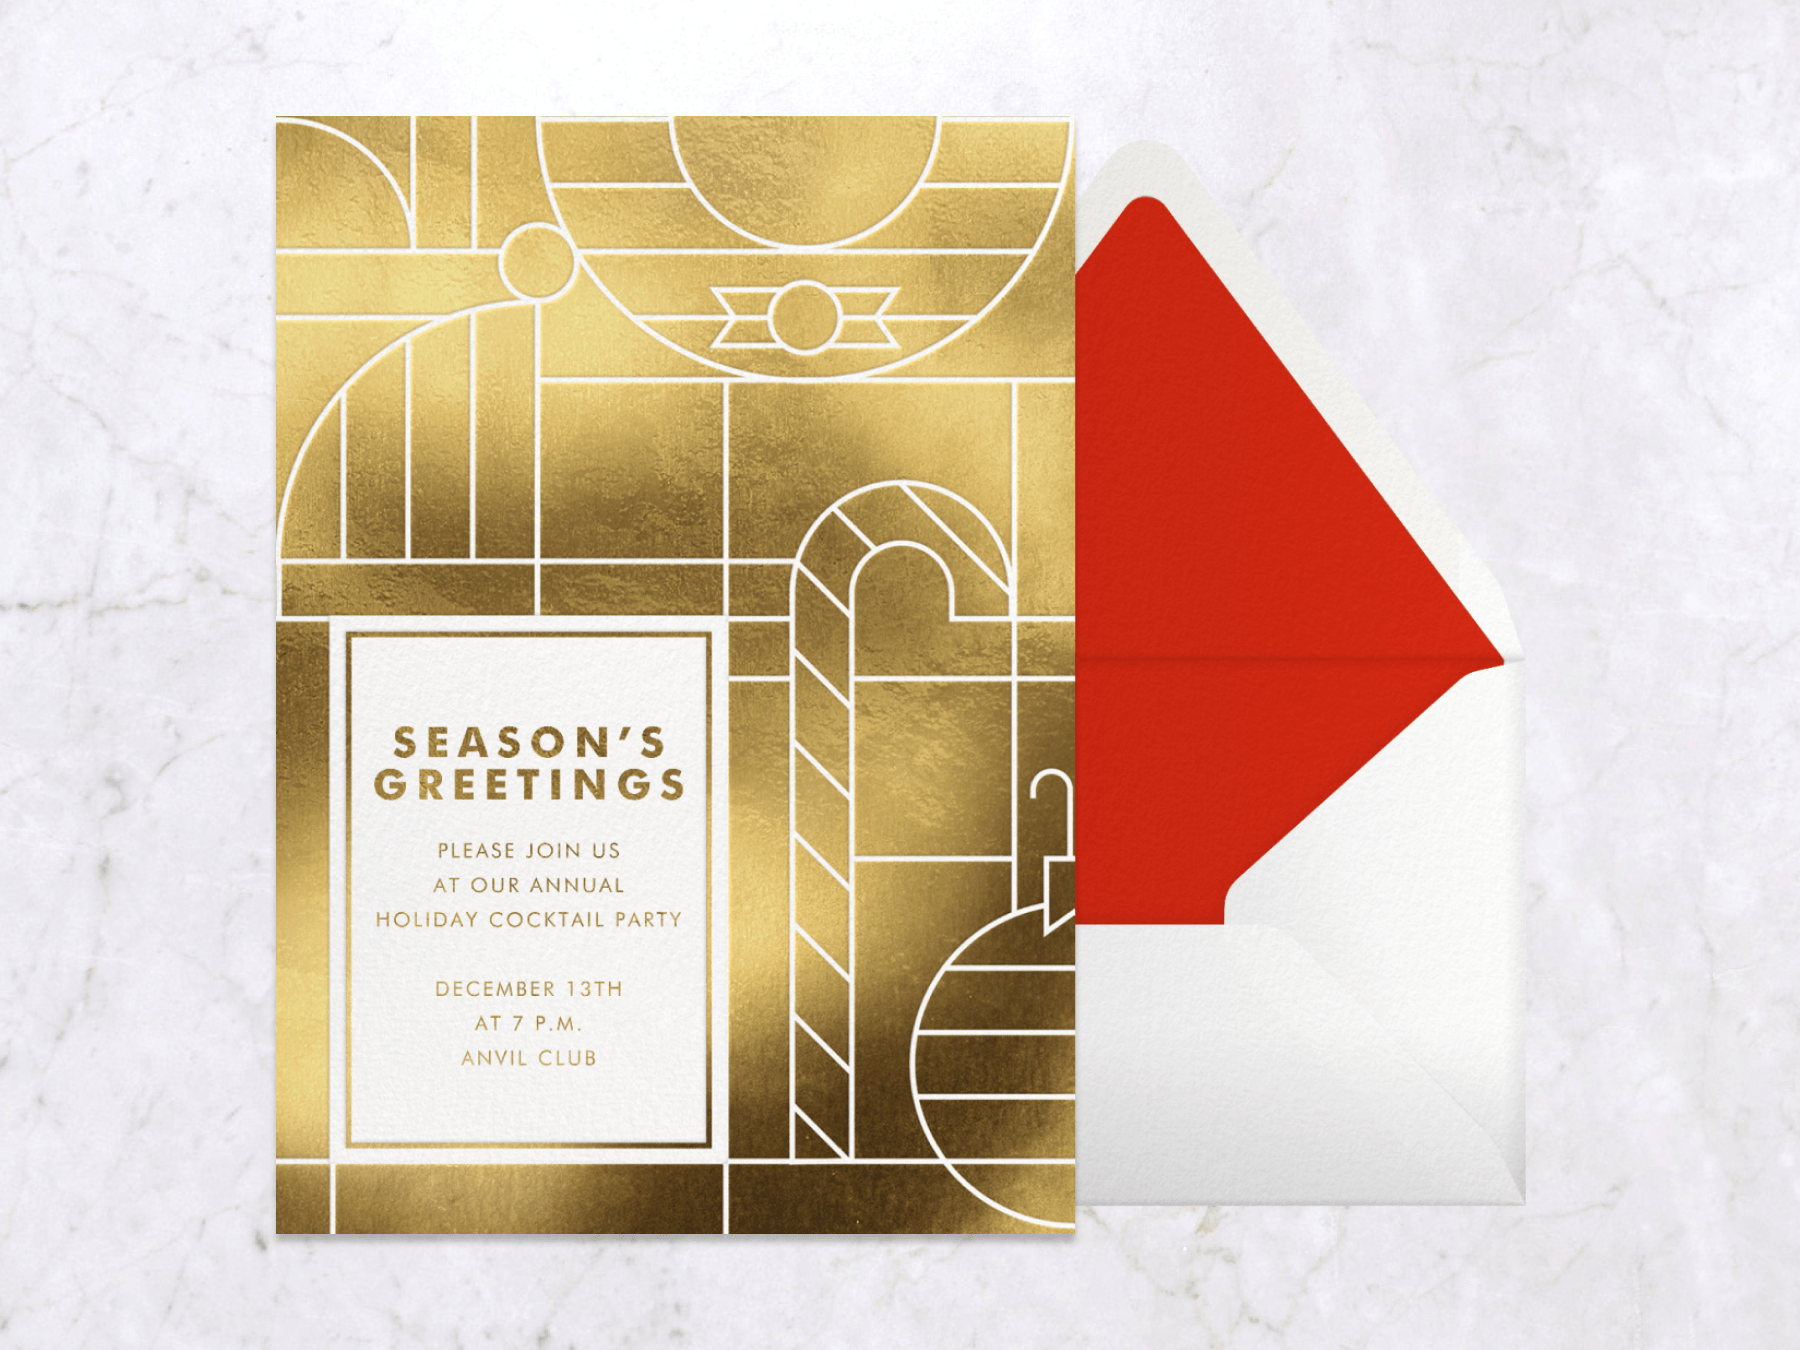 metallic gold holiday cocktail party invitation with simplified white Christmas-related shapes—including a candy cane, wreath, and ornament—forming a pattern